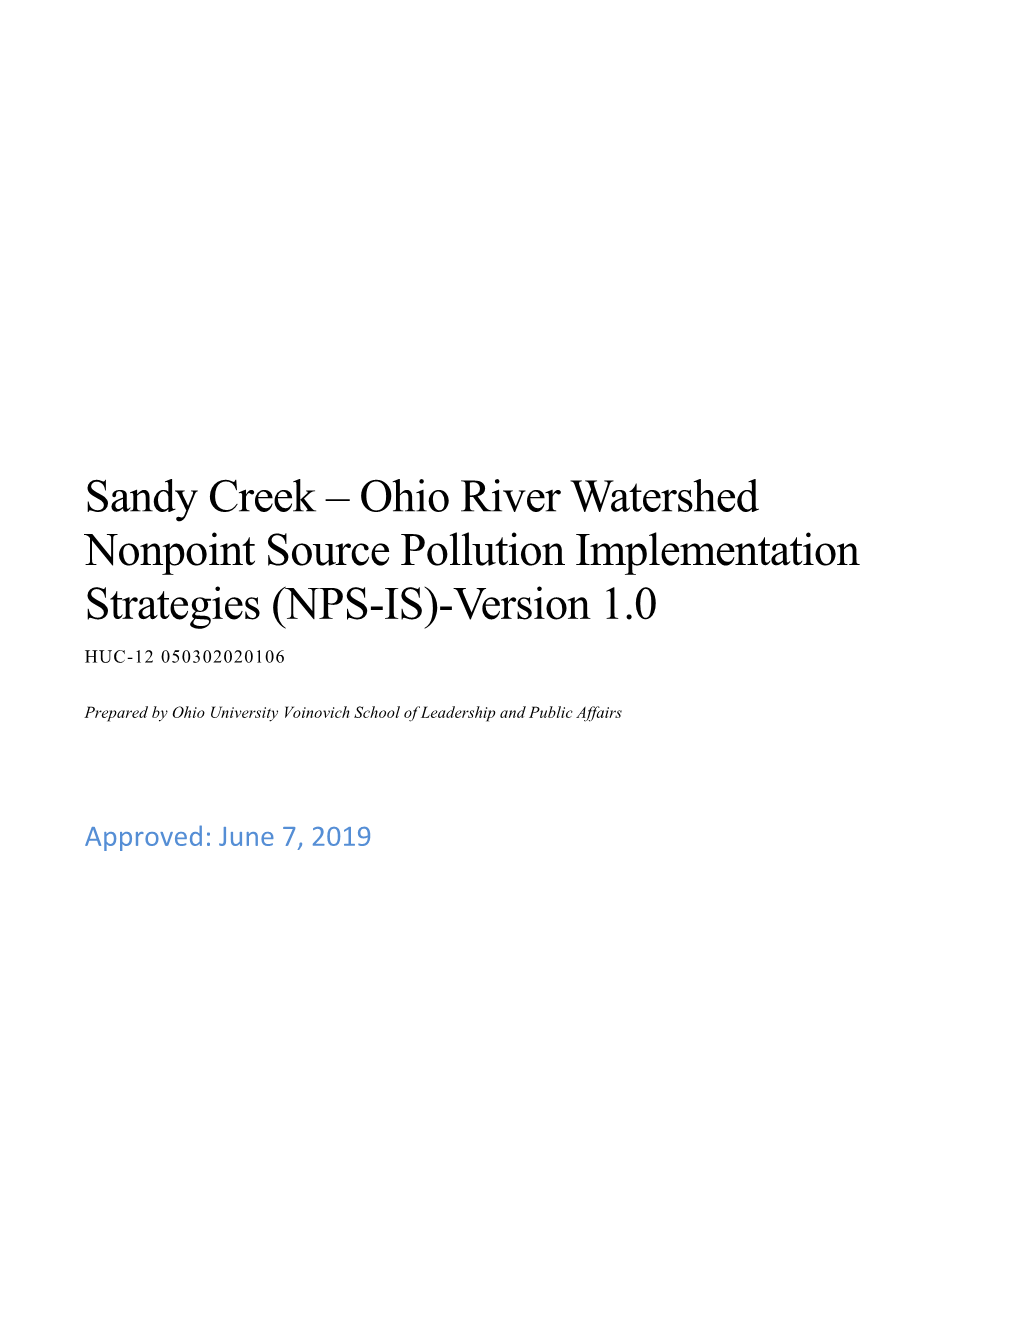 Sandy Creek – Ohio River Watershed Nonpoint Source Pollution Implementation Strategies (NPS-IS)-Version 1.0